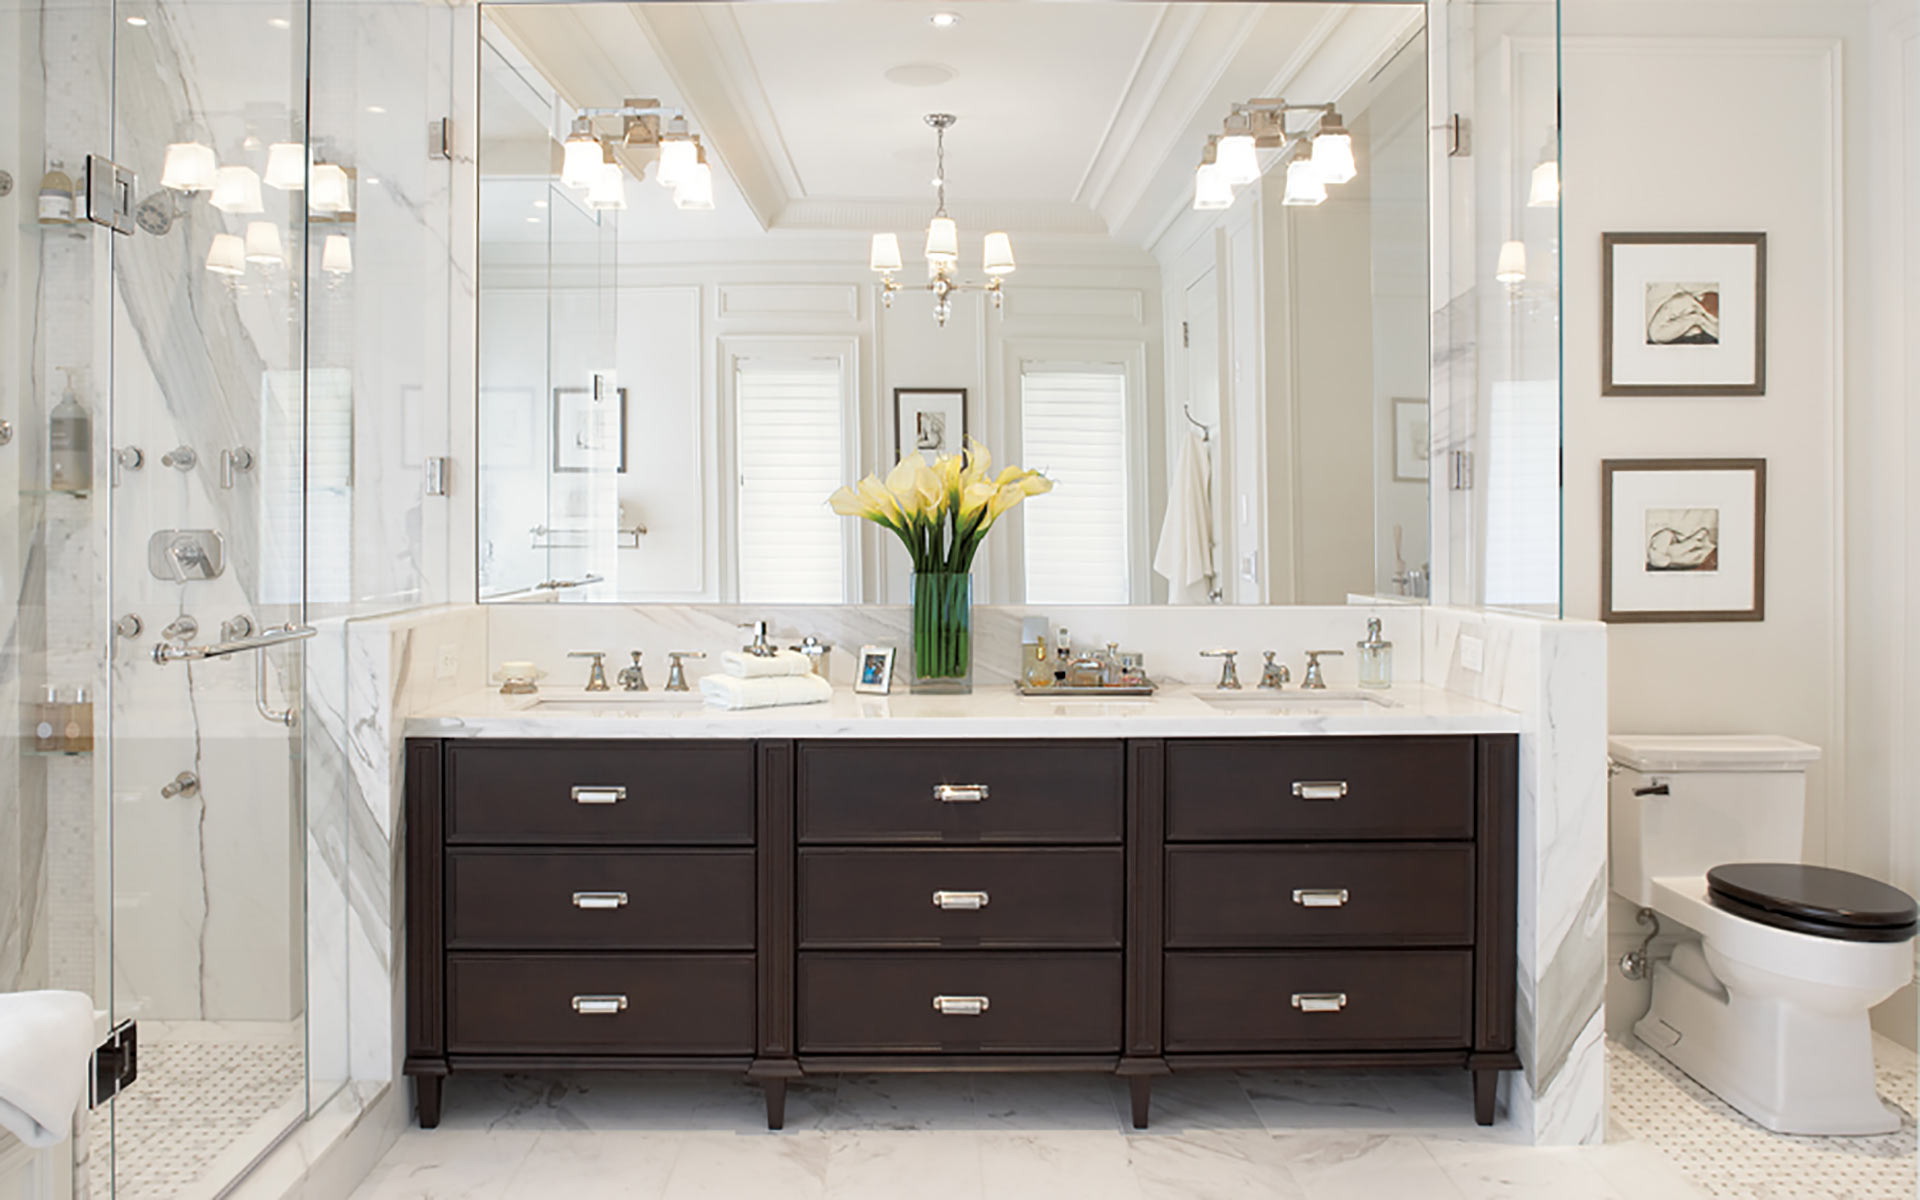 DEANE has designed soothing, beautiful bathrooms in a variety of styles.